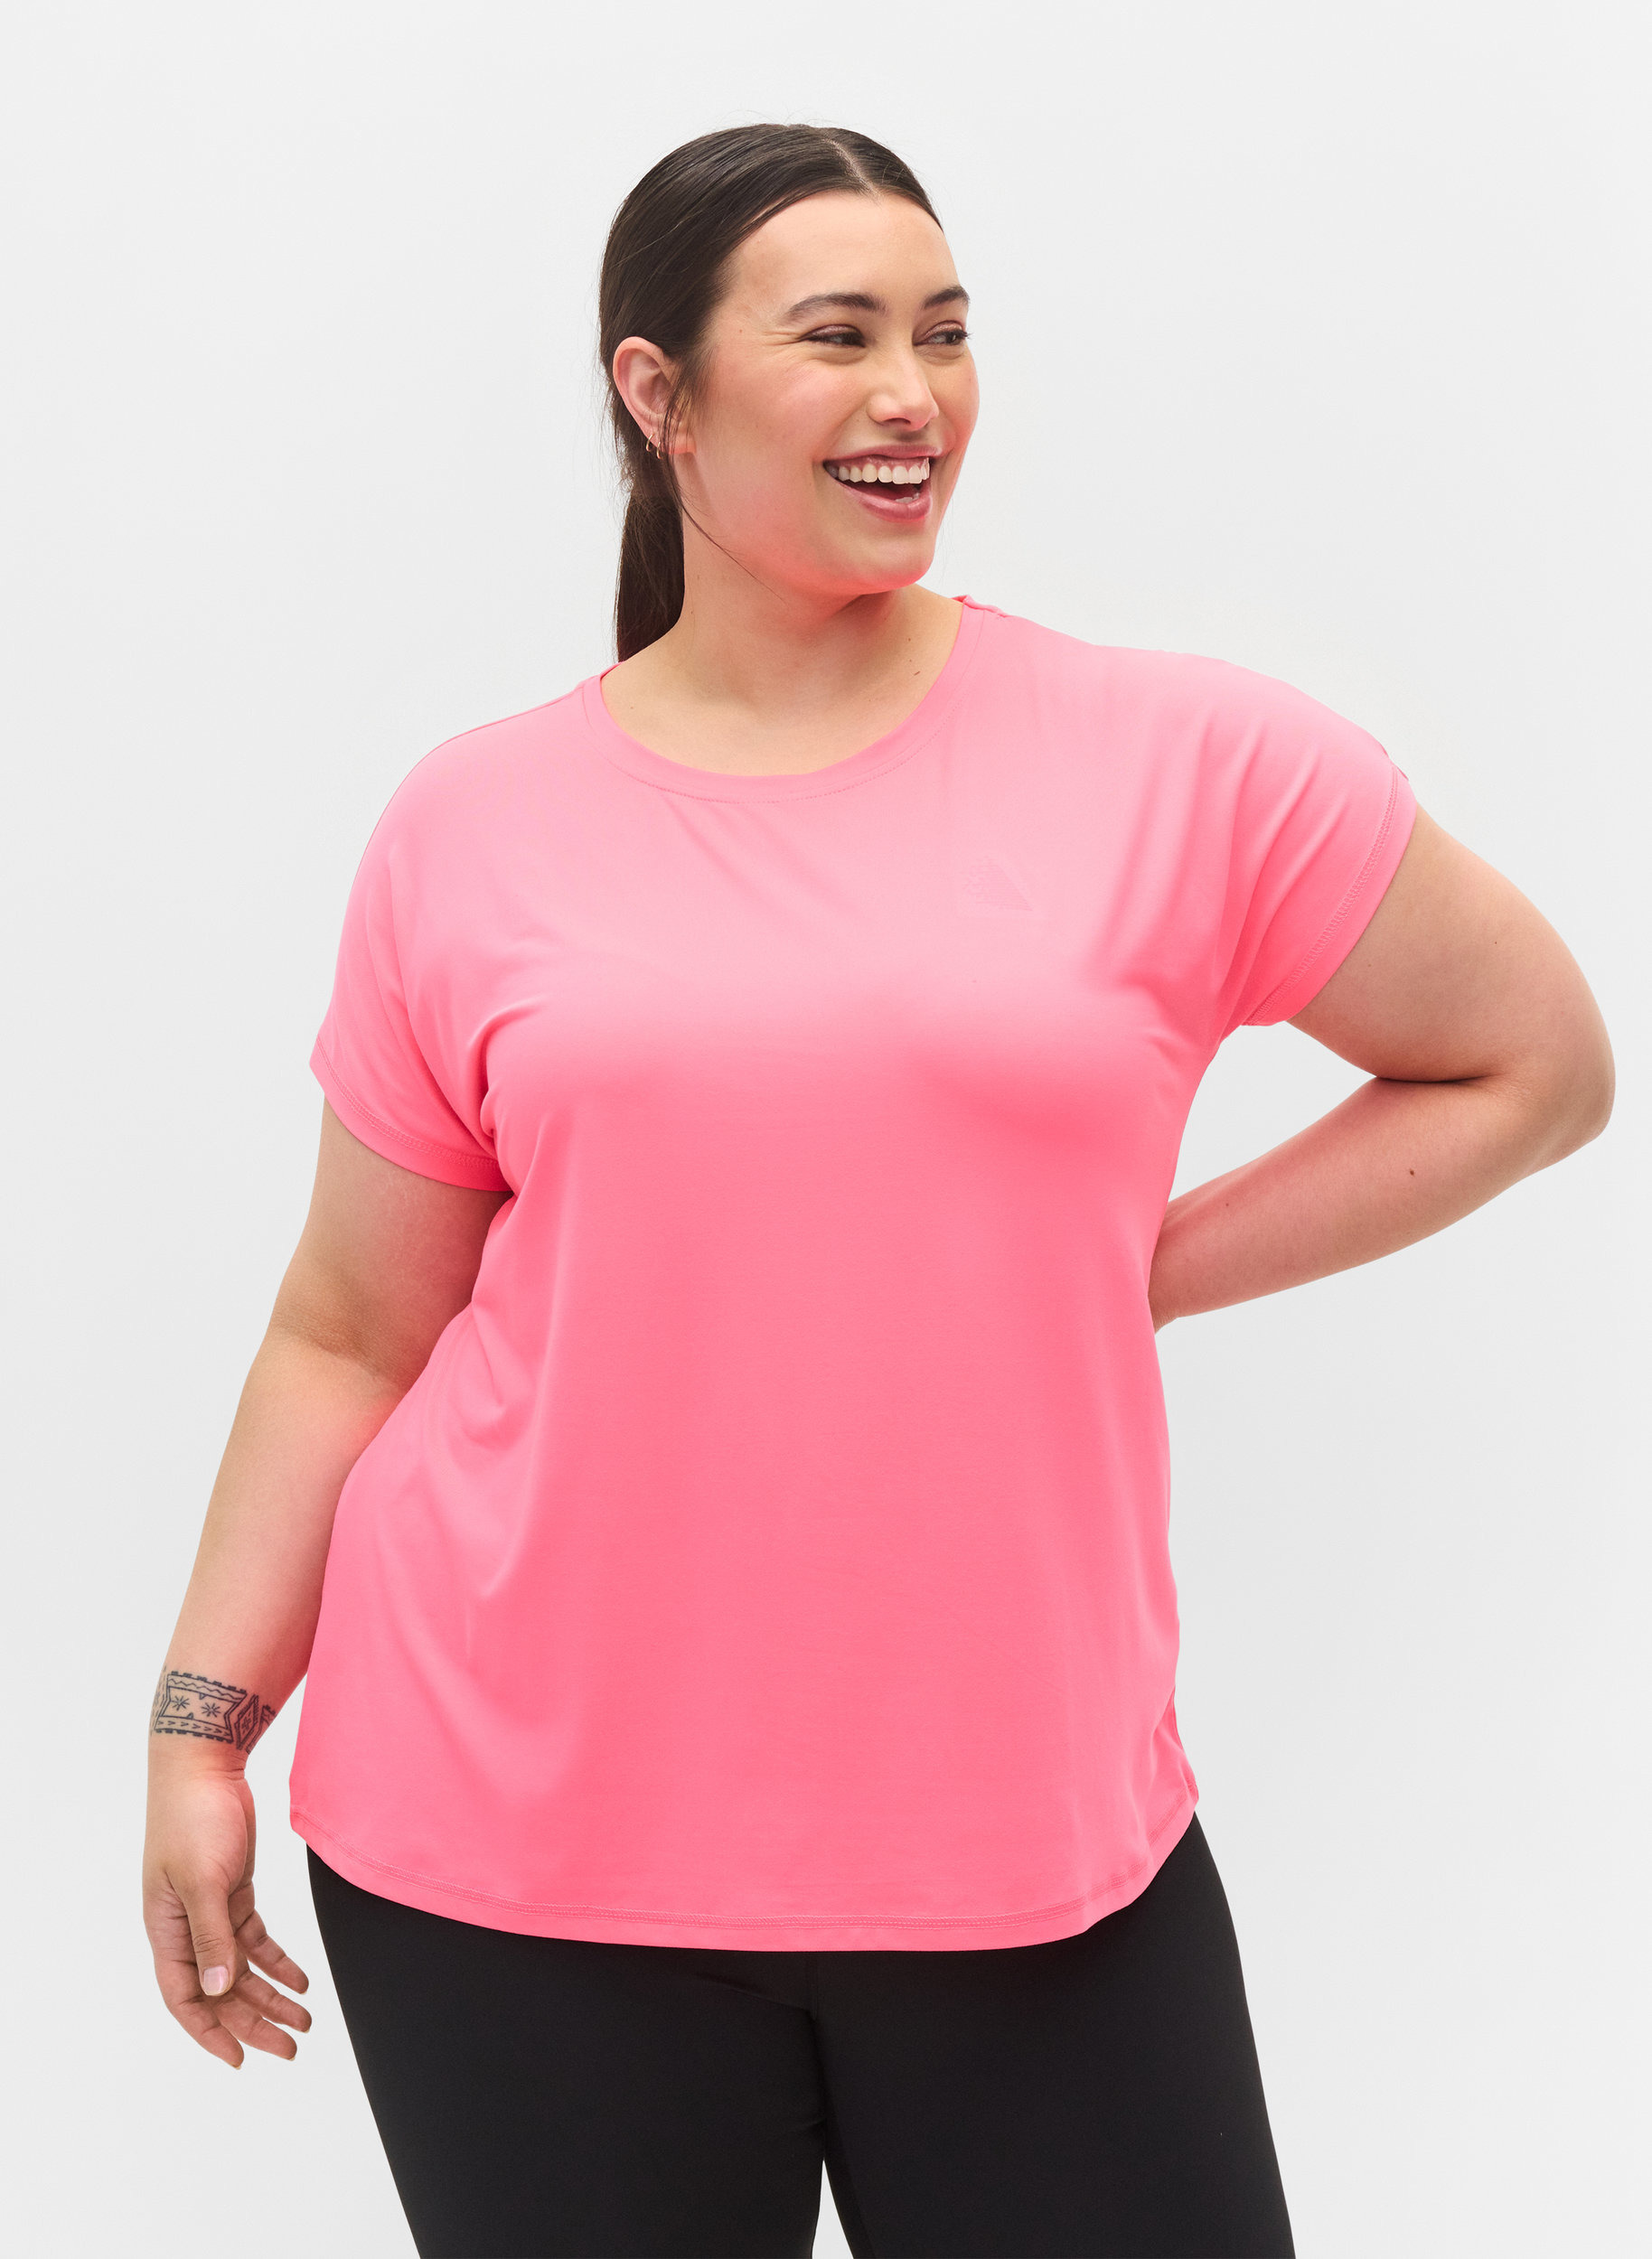 Einfarbiges Trainings-T-Shirt, Neon pink, Model